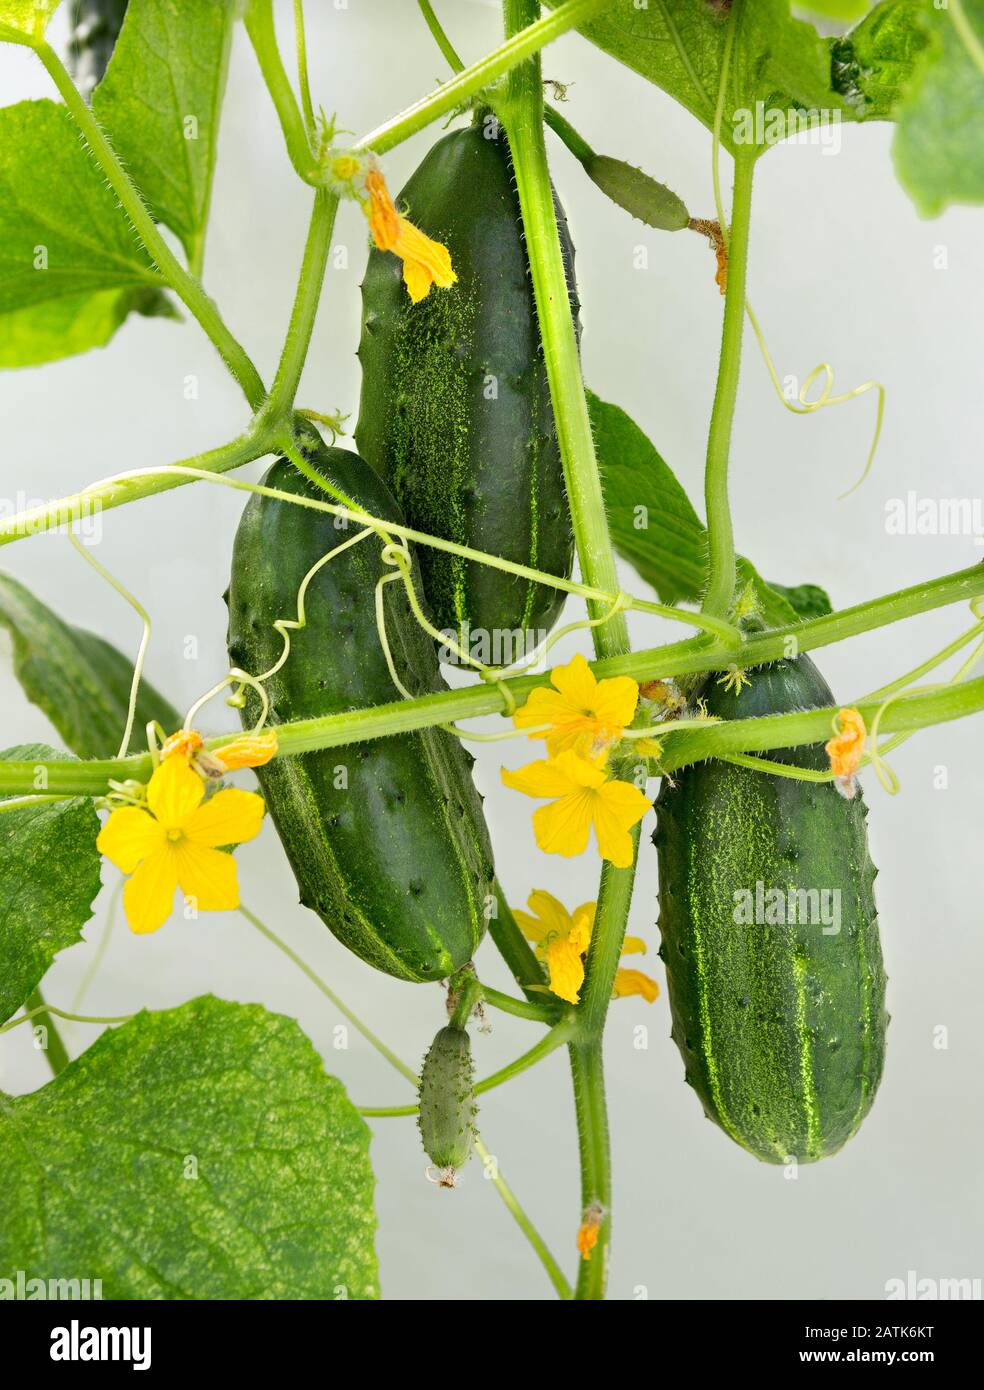 Cucumber plant. Cucumber with leafs and flowers. Cucumbers in the garden Stock Photo